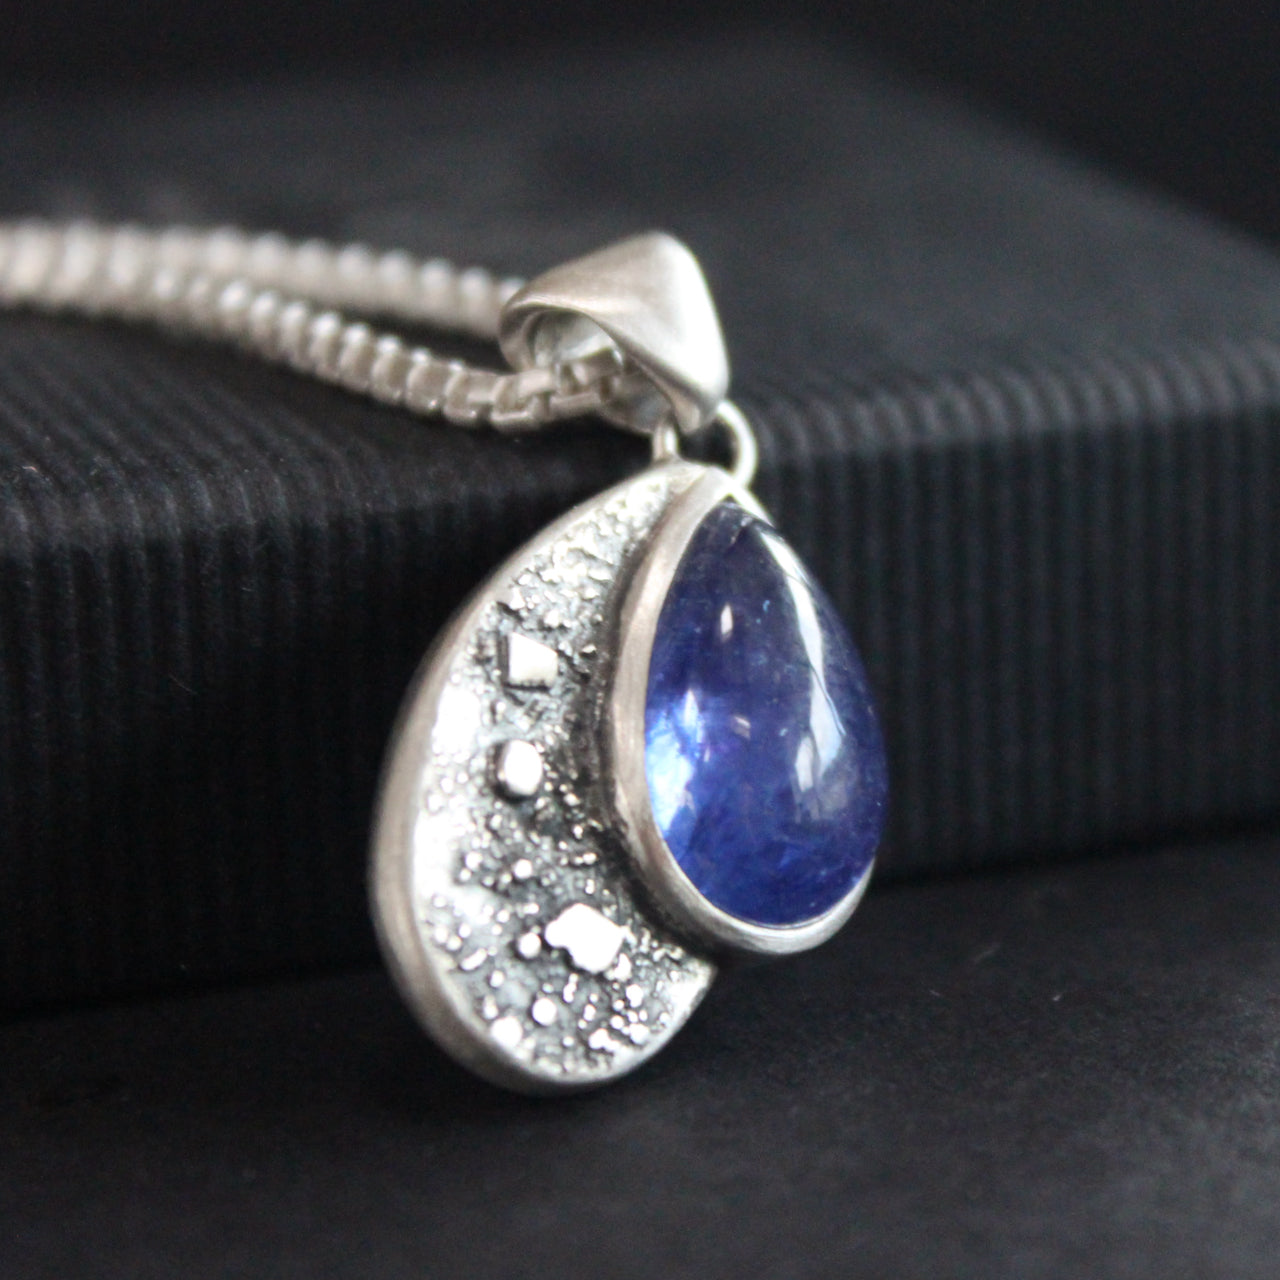 a Carin Lindberg pendant of a teardrop textured silver and blue stone on a silver chain.